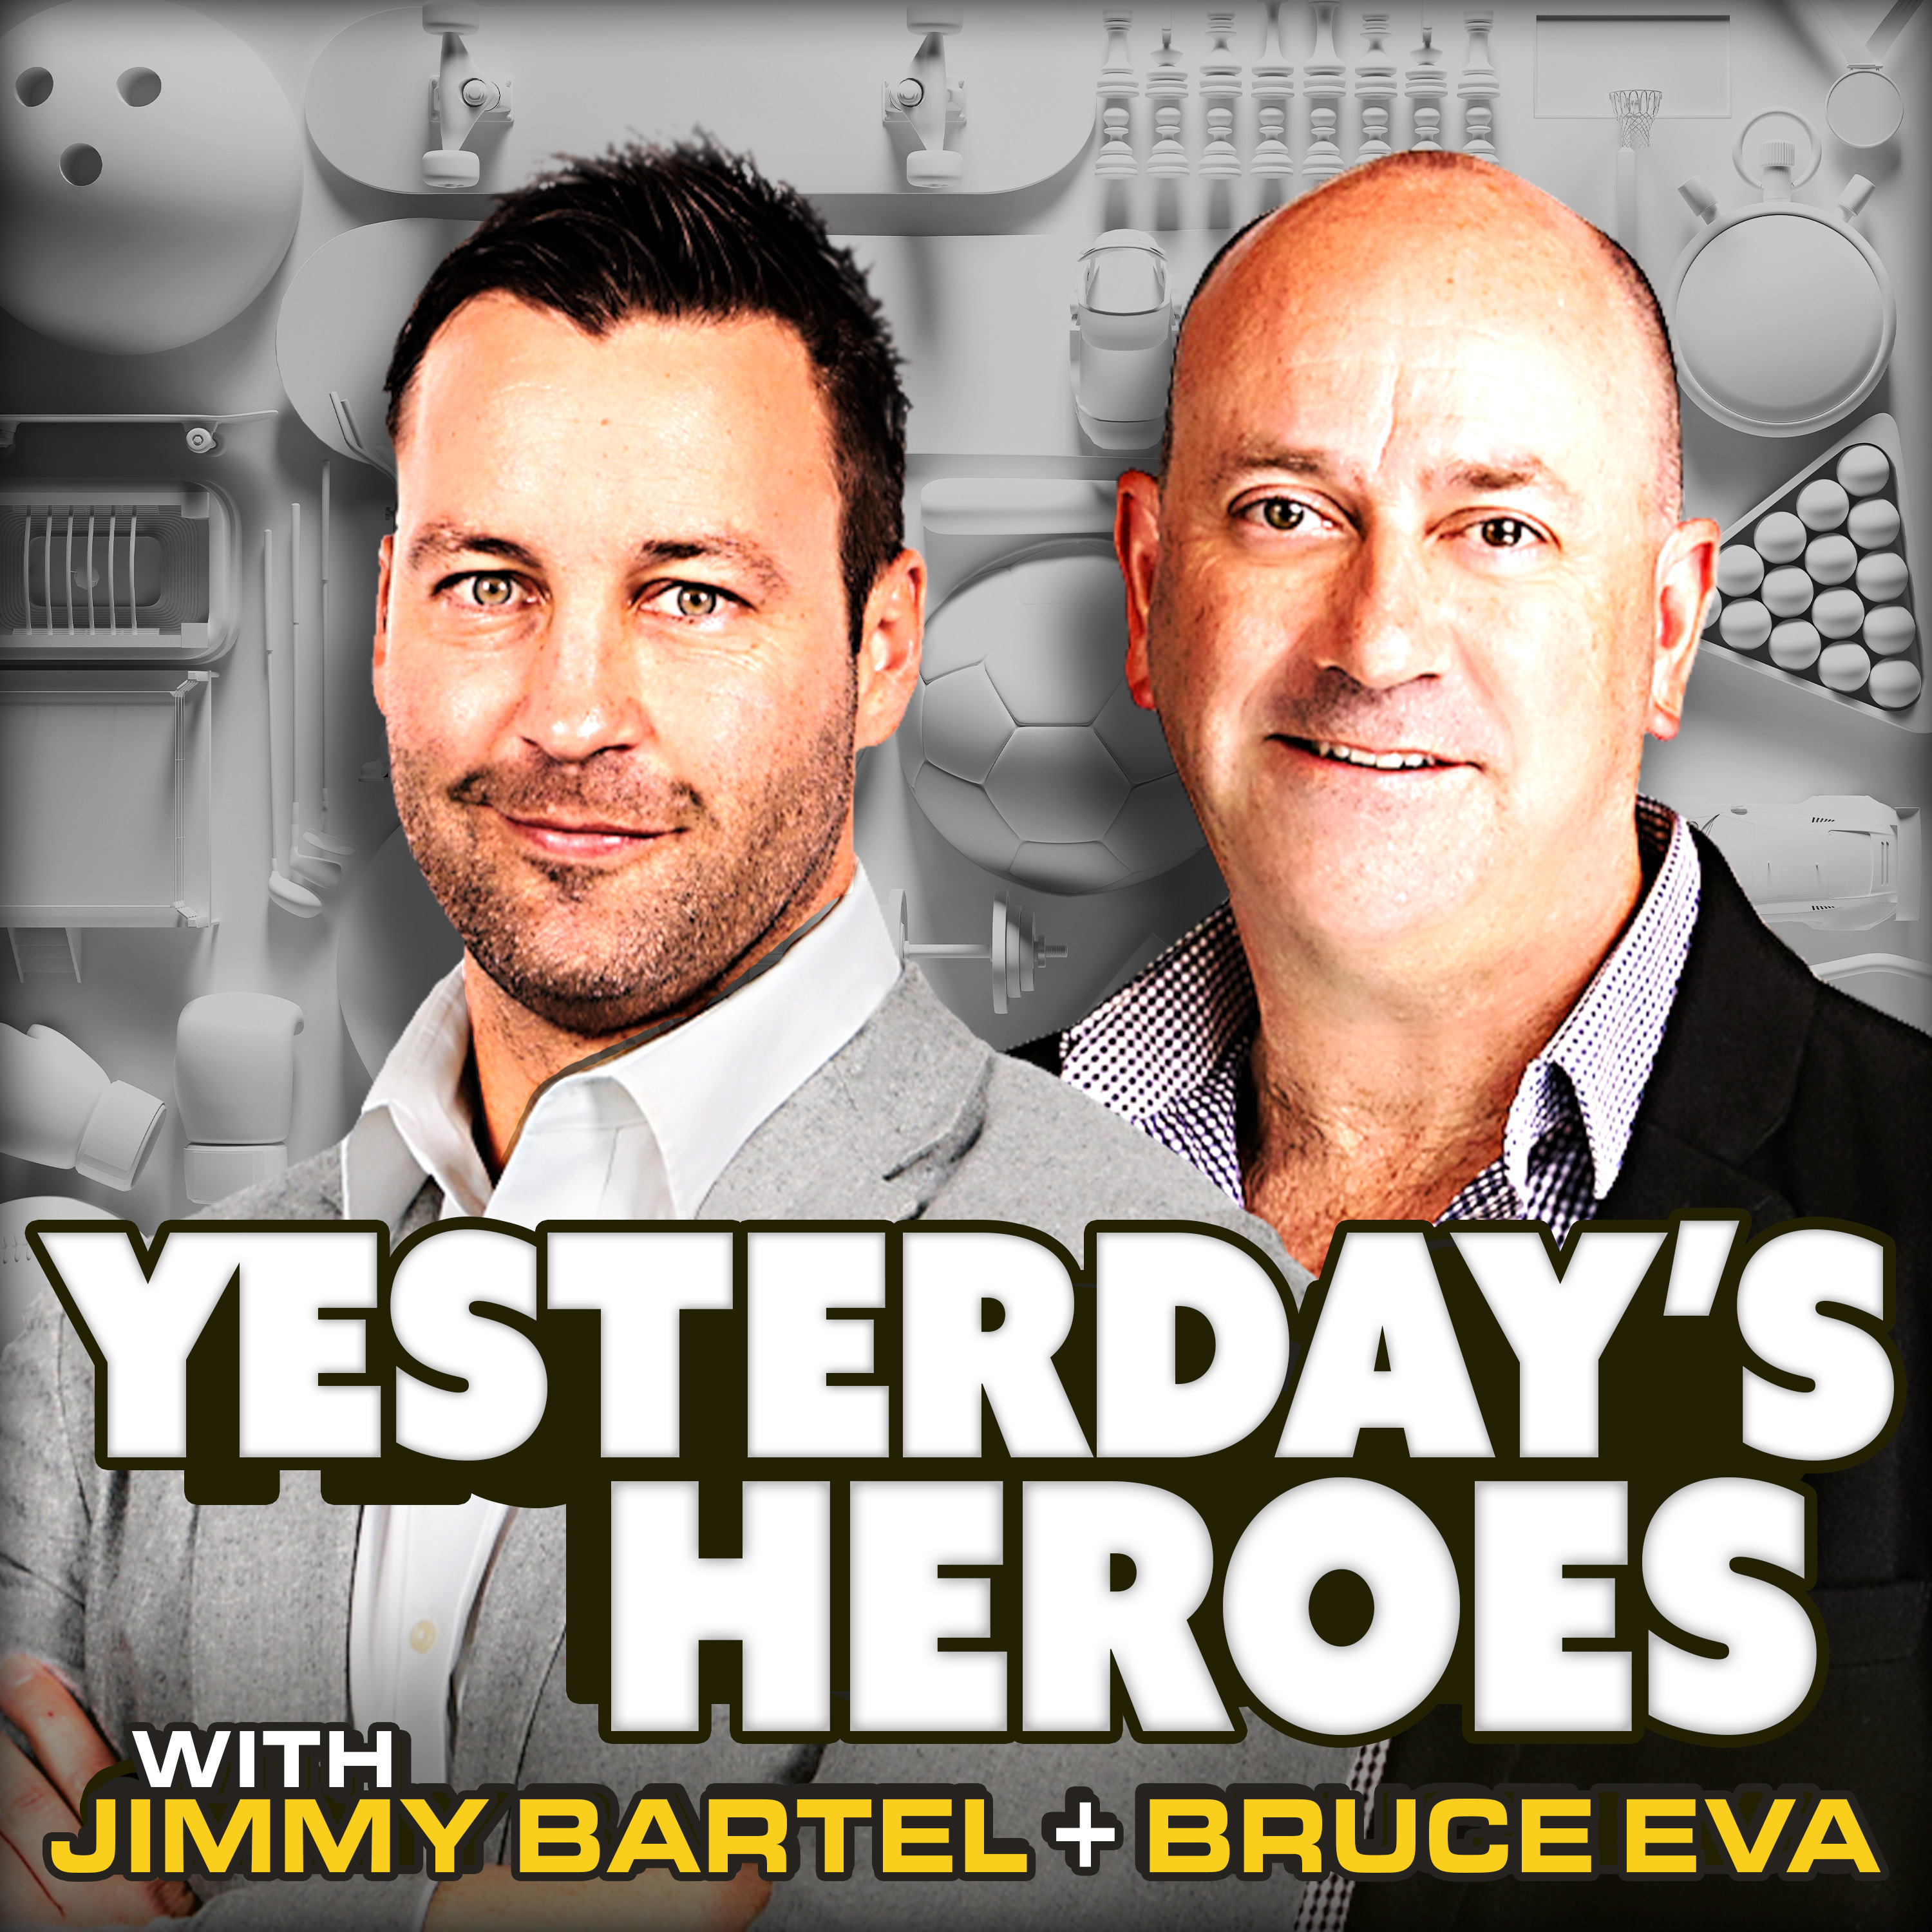 Jimmy Bartel’s Story: Self taught to Hall of Fame